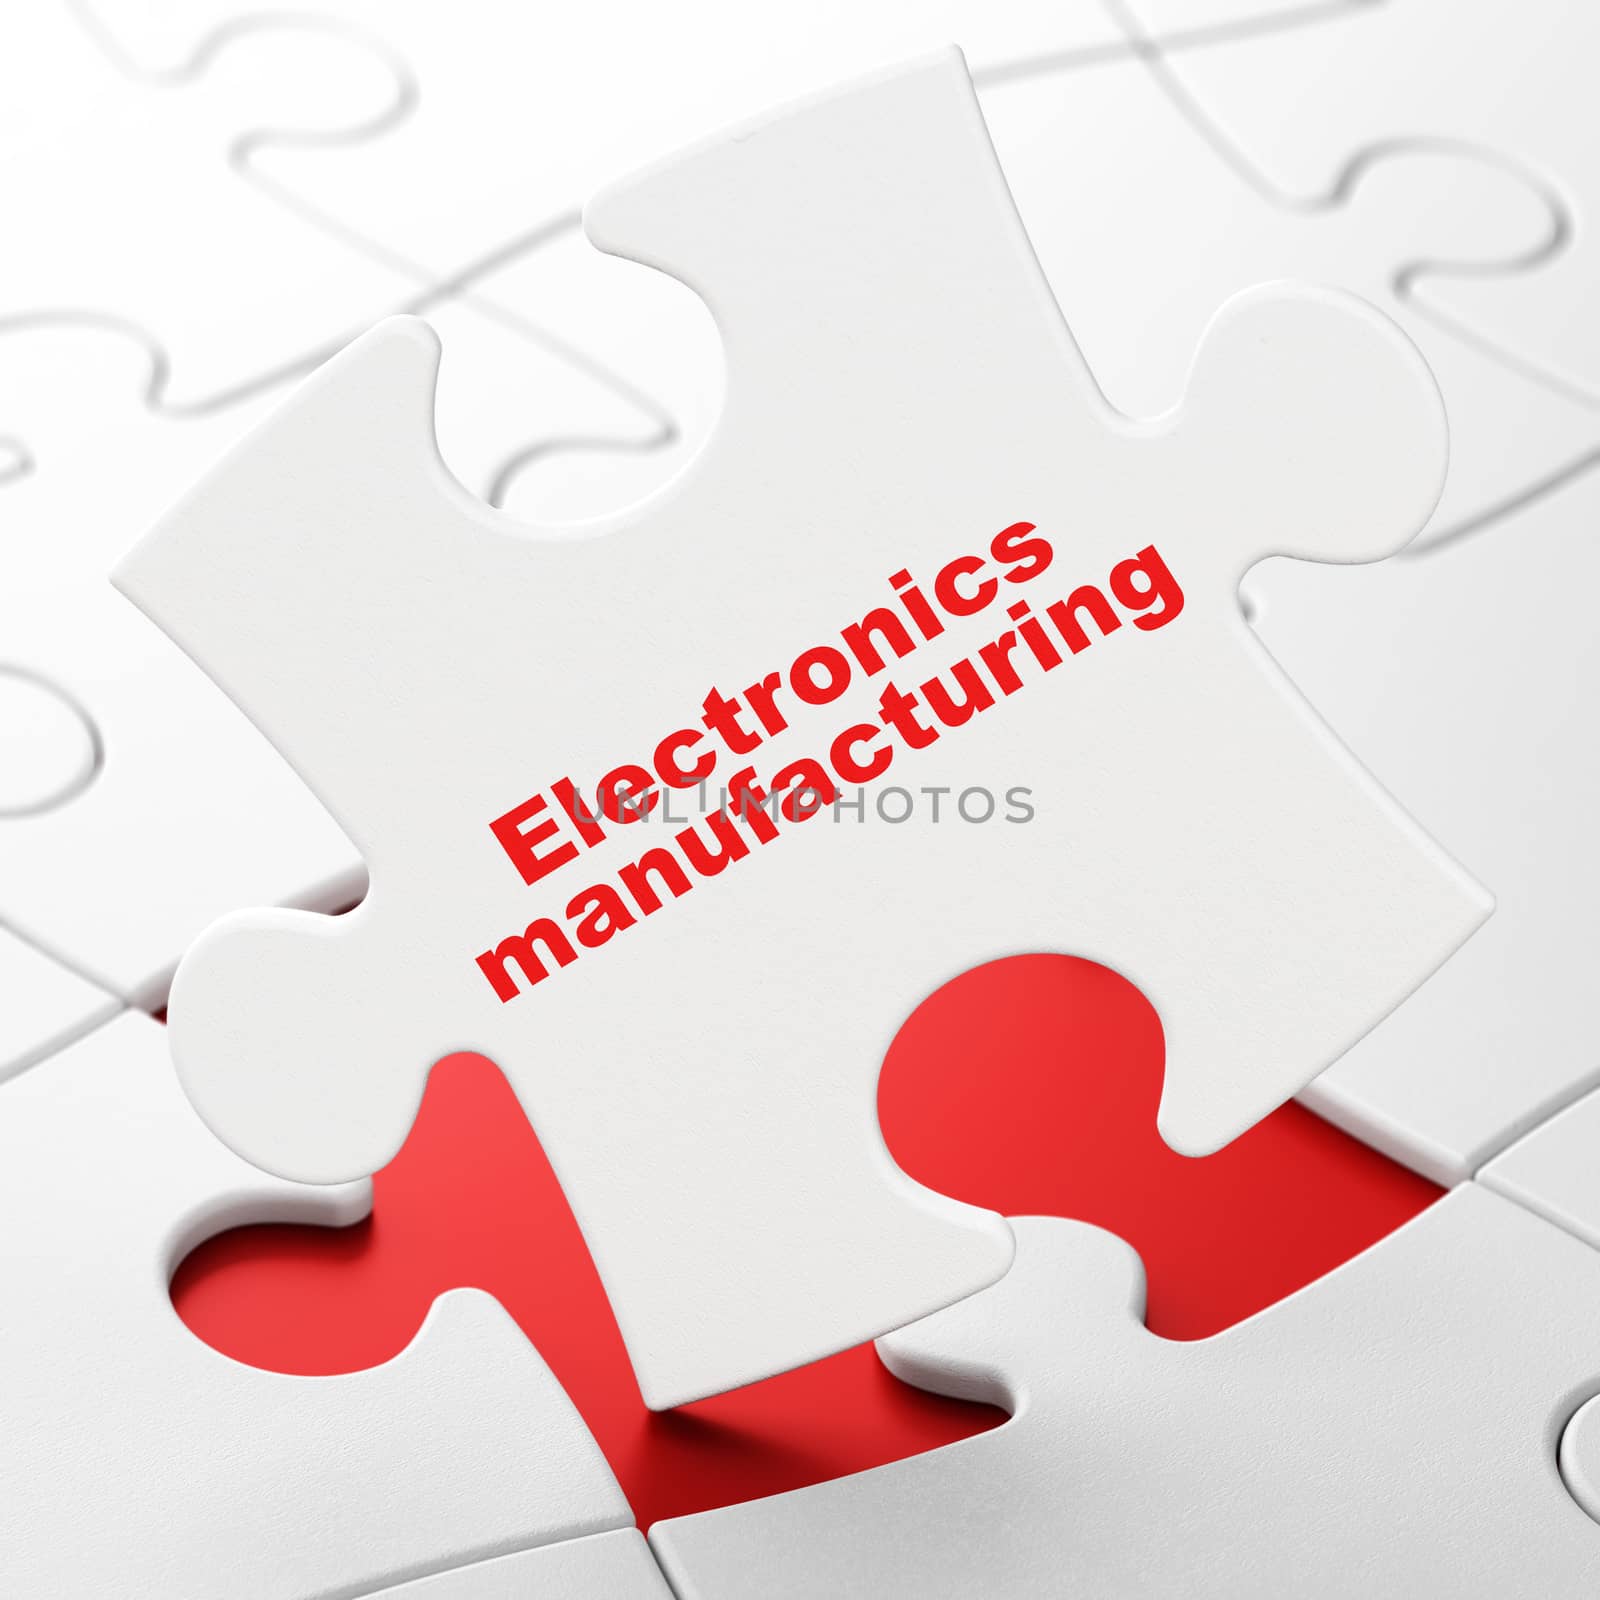 Manufacuring concept: Electronics Manufacturing on White puzzle pieces background, 3D rendering